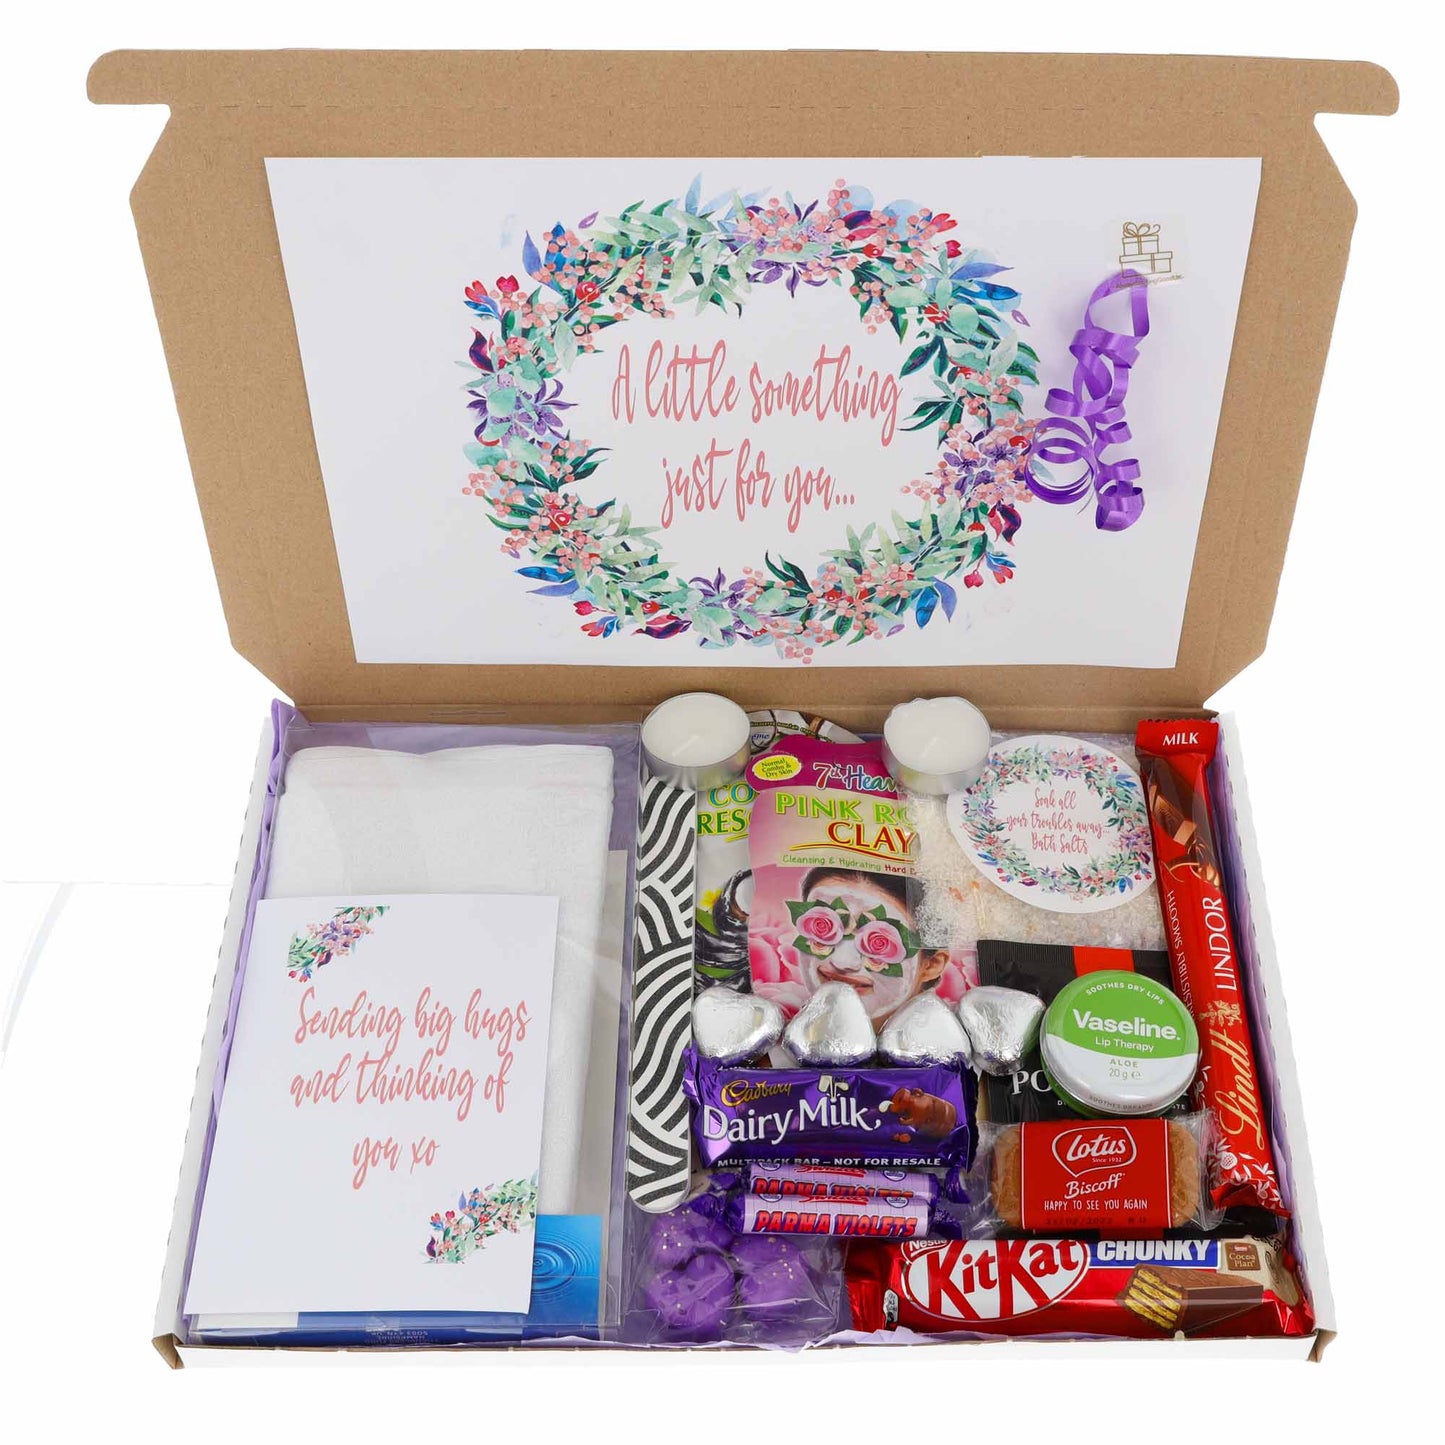 Chocolate Lover & Beauty Pamper Letterbox Gift Set  - Always Looking Good -   